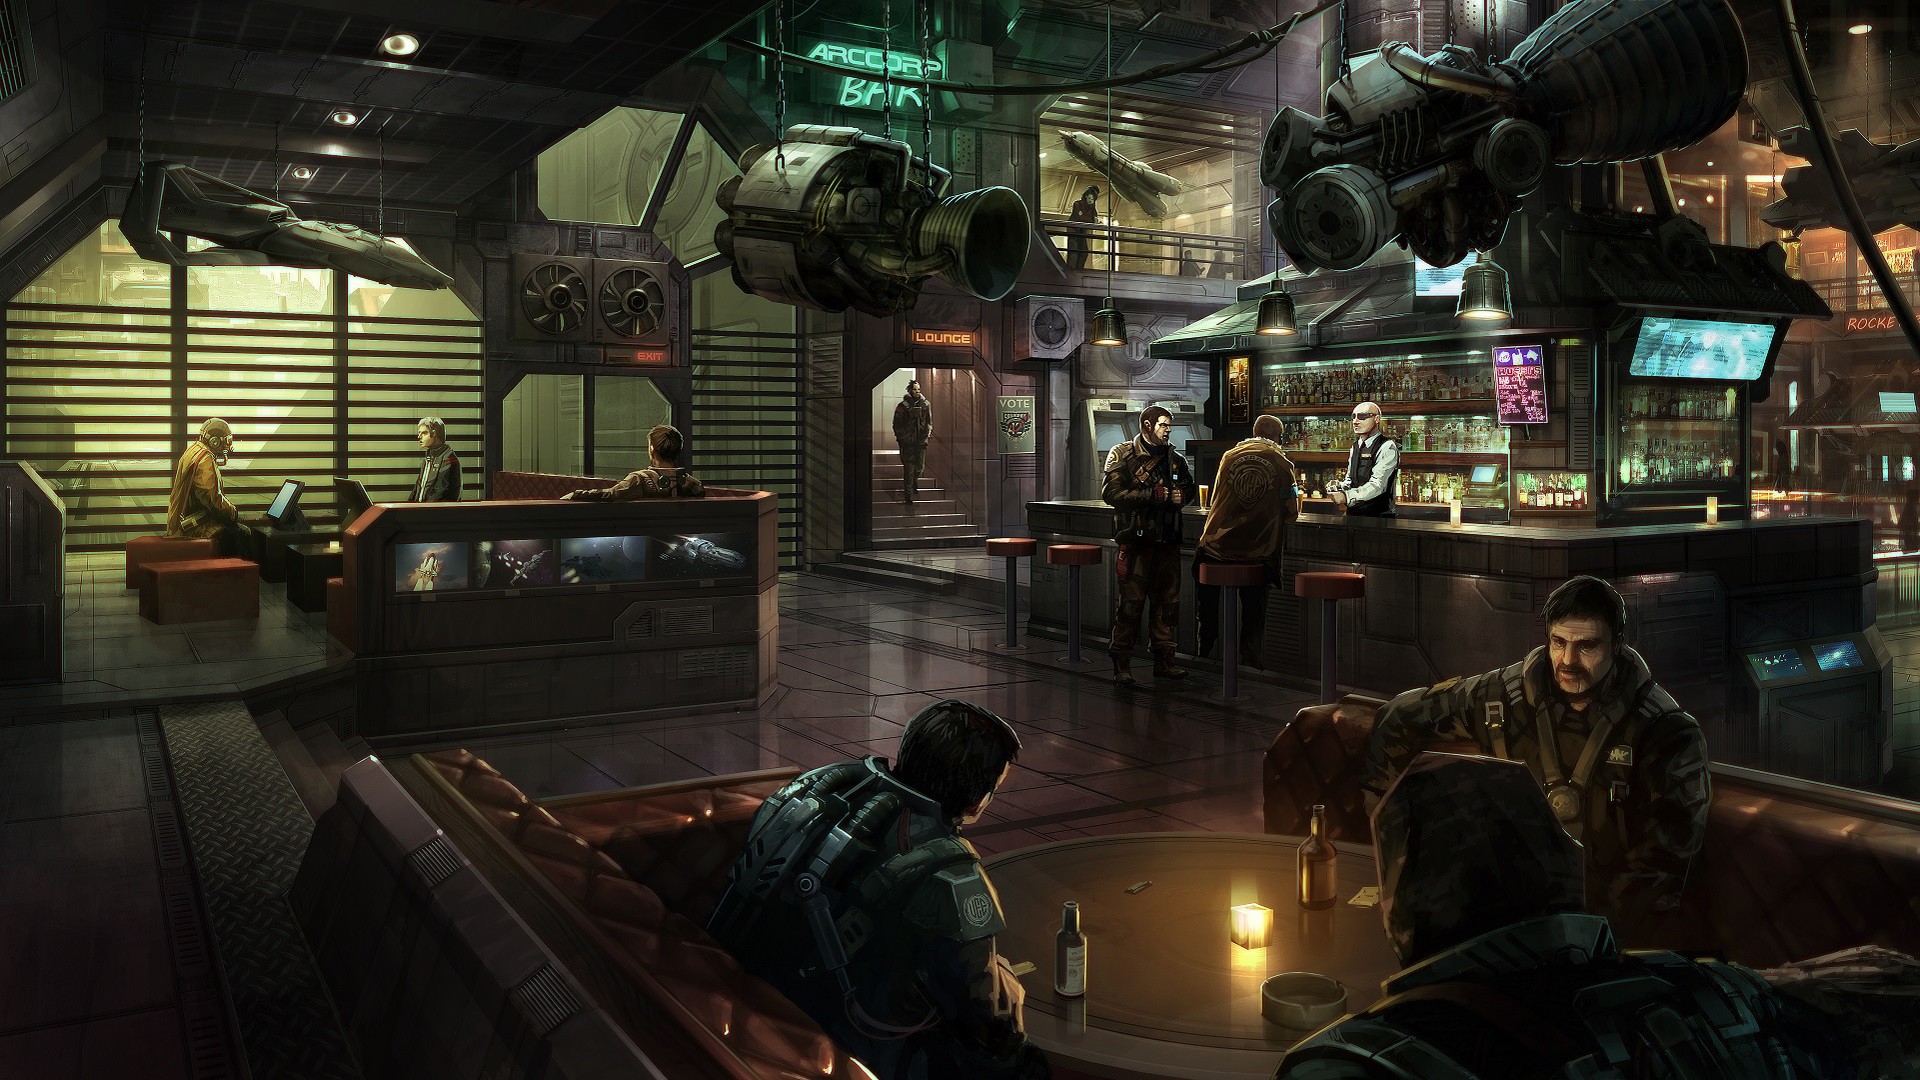 Games_Bar_for_heroes_of_the_game_Star_Citizen_096752_.jpg